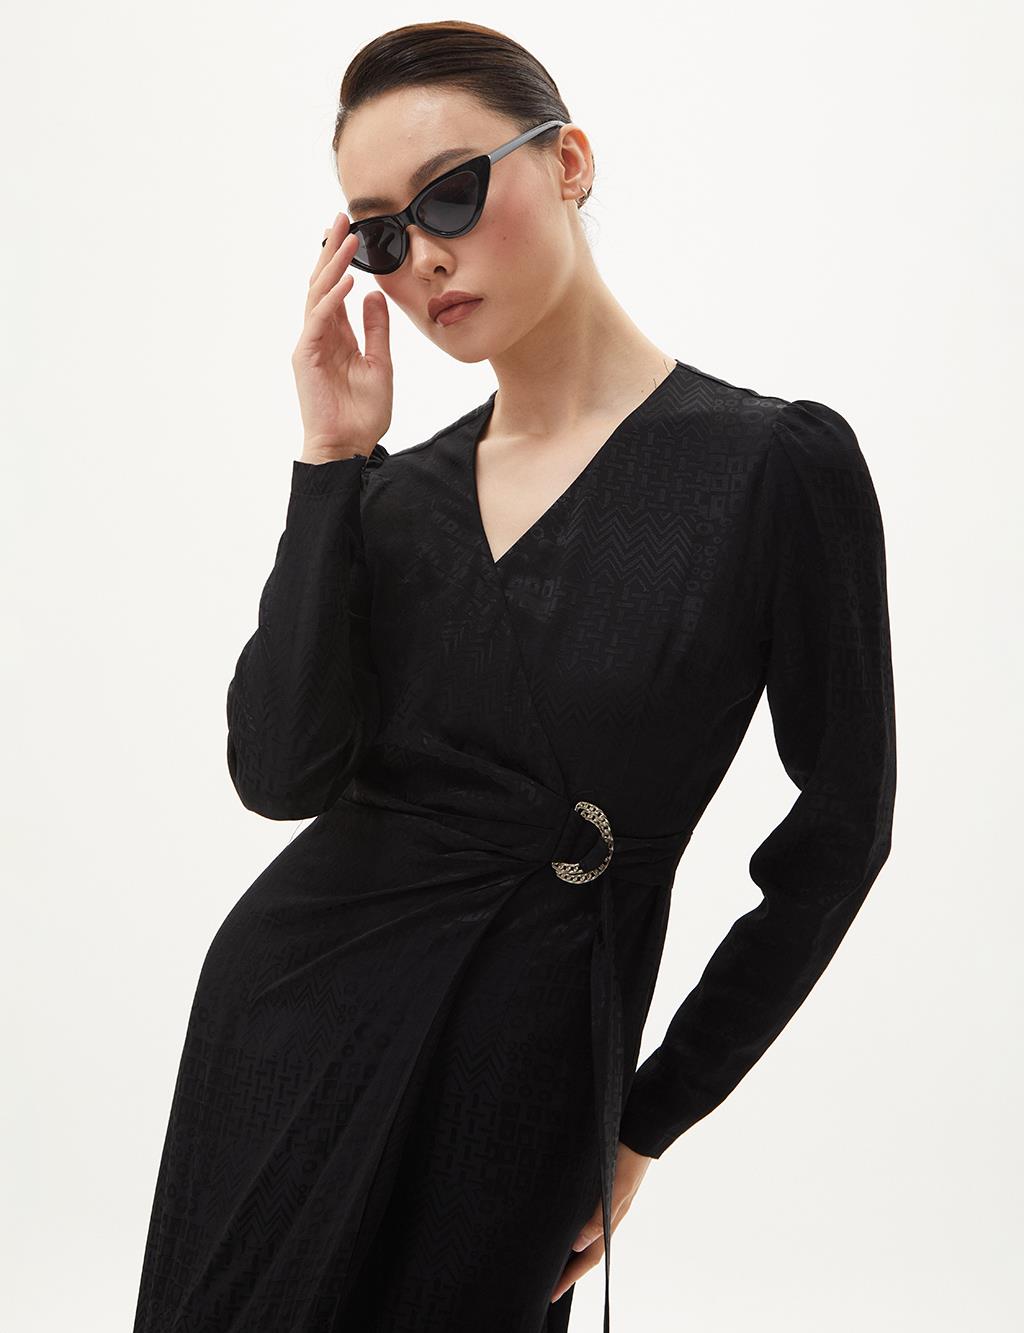 Stylish Dress Black with Metal Buckle Detail